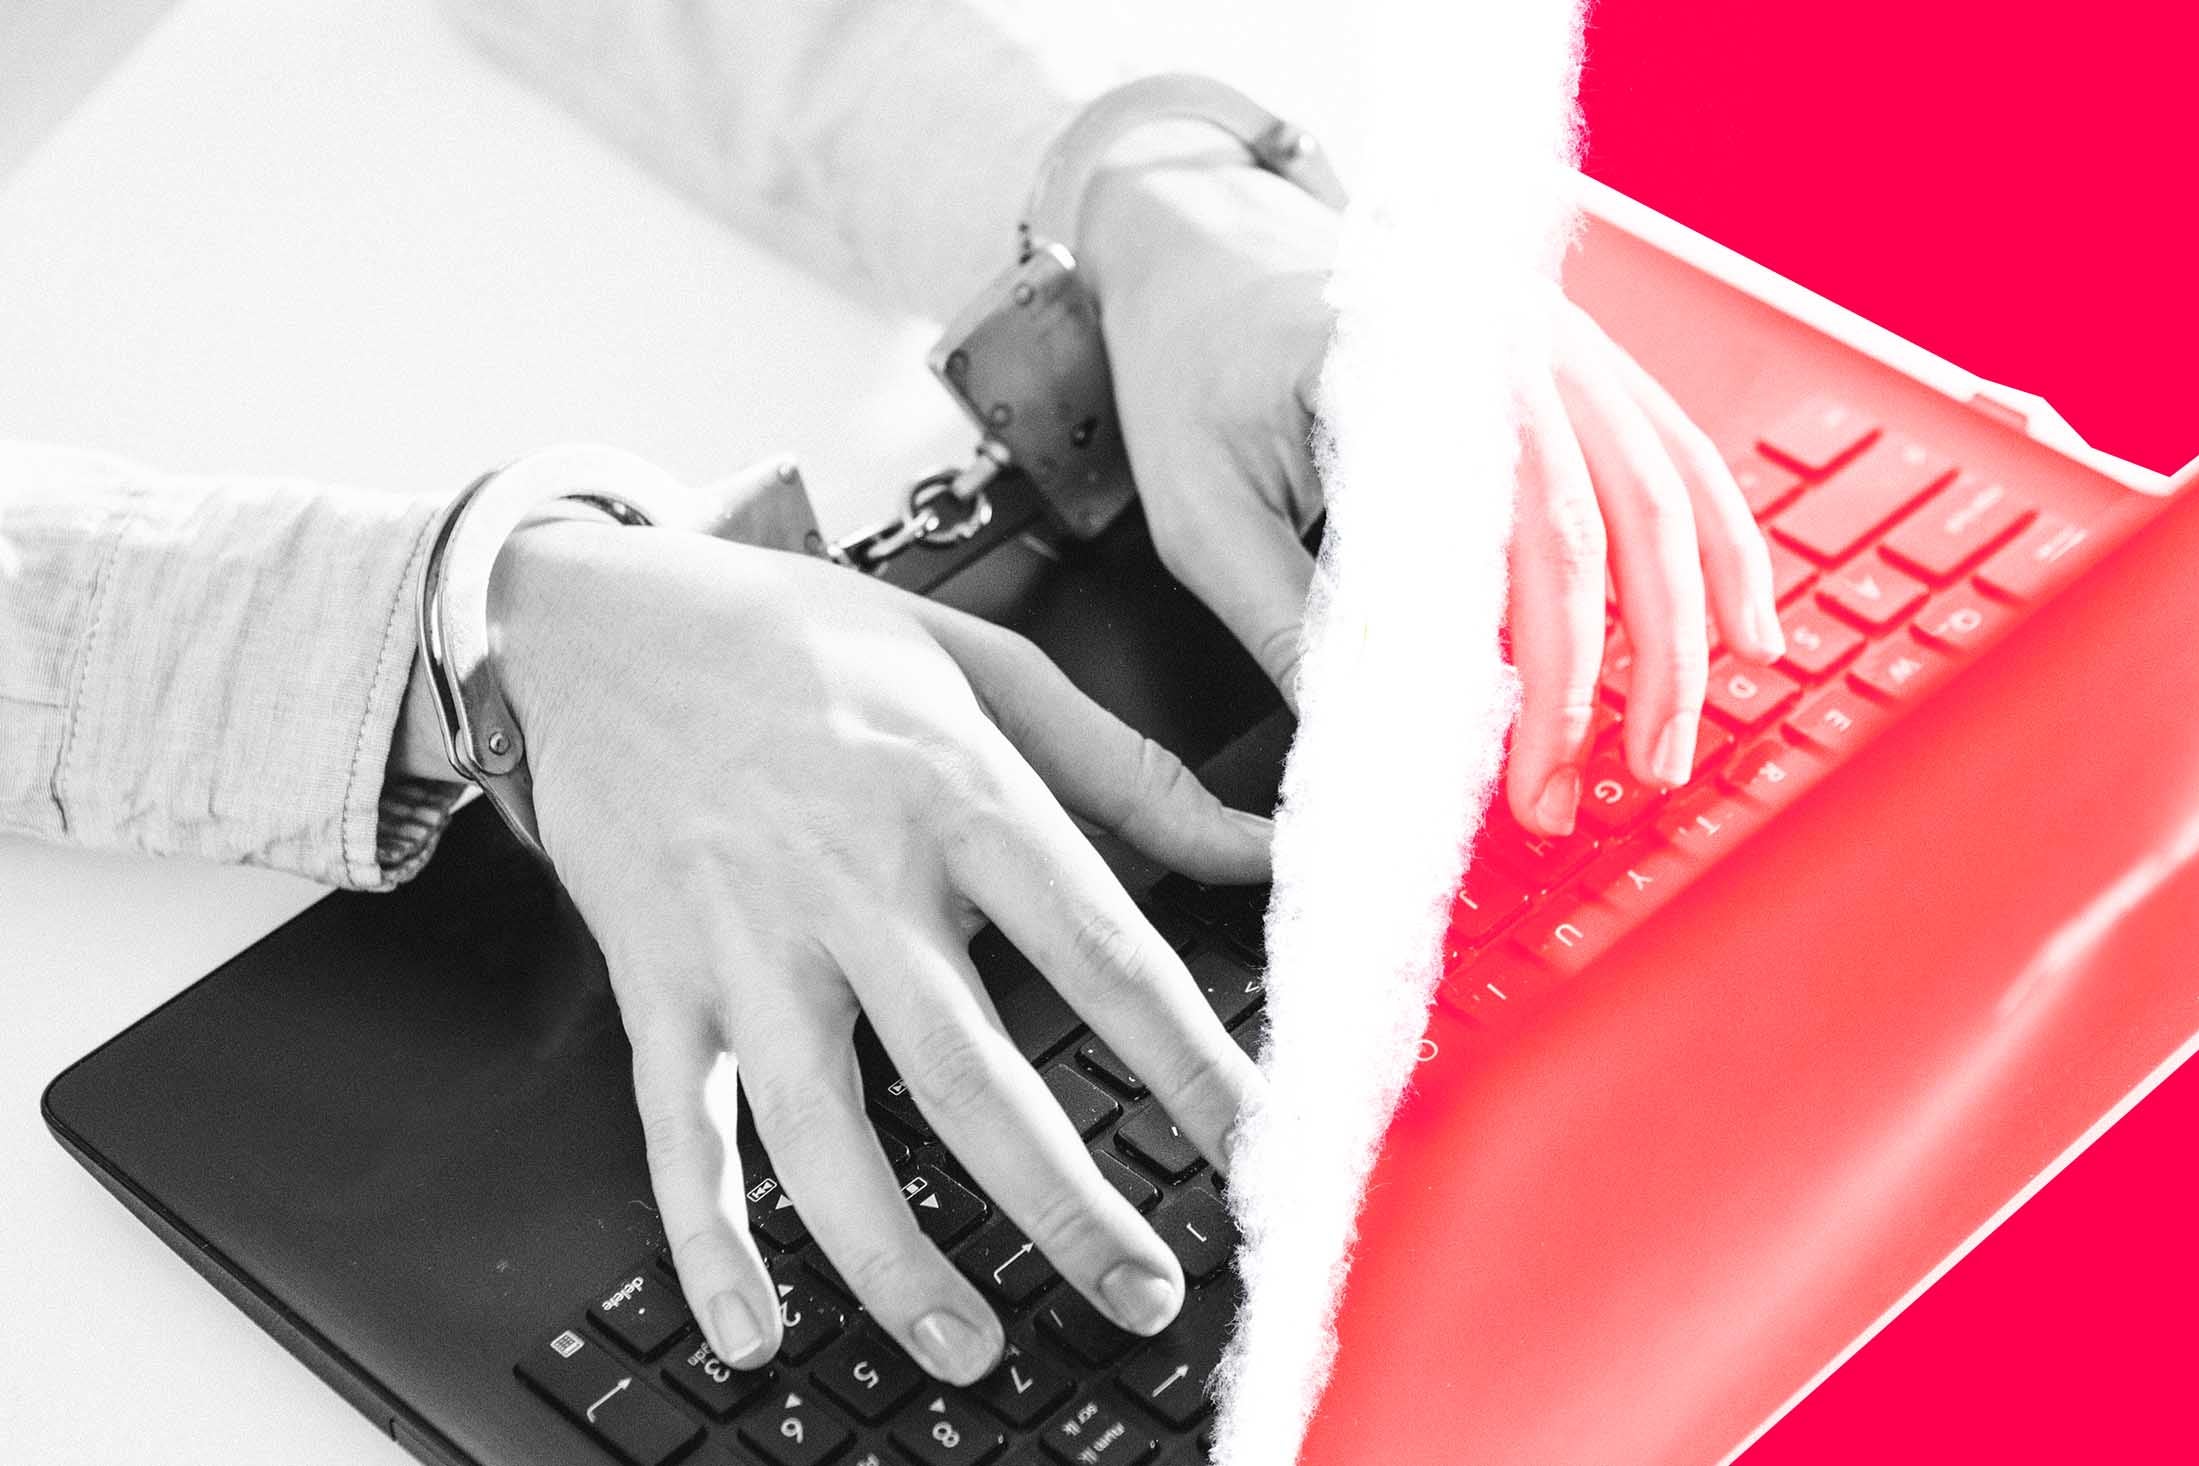 Photo illustration of handcuffed hands typing on a laptop, with a tear running through the center of the image.